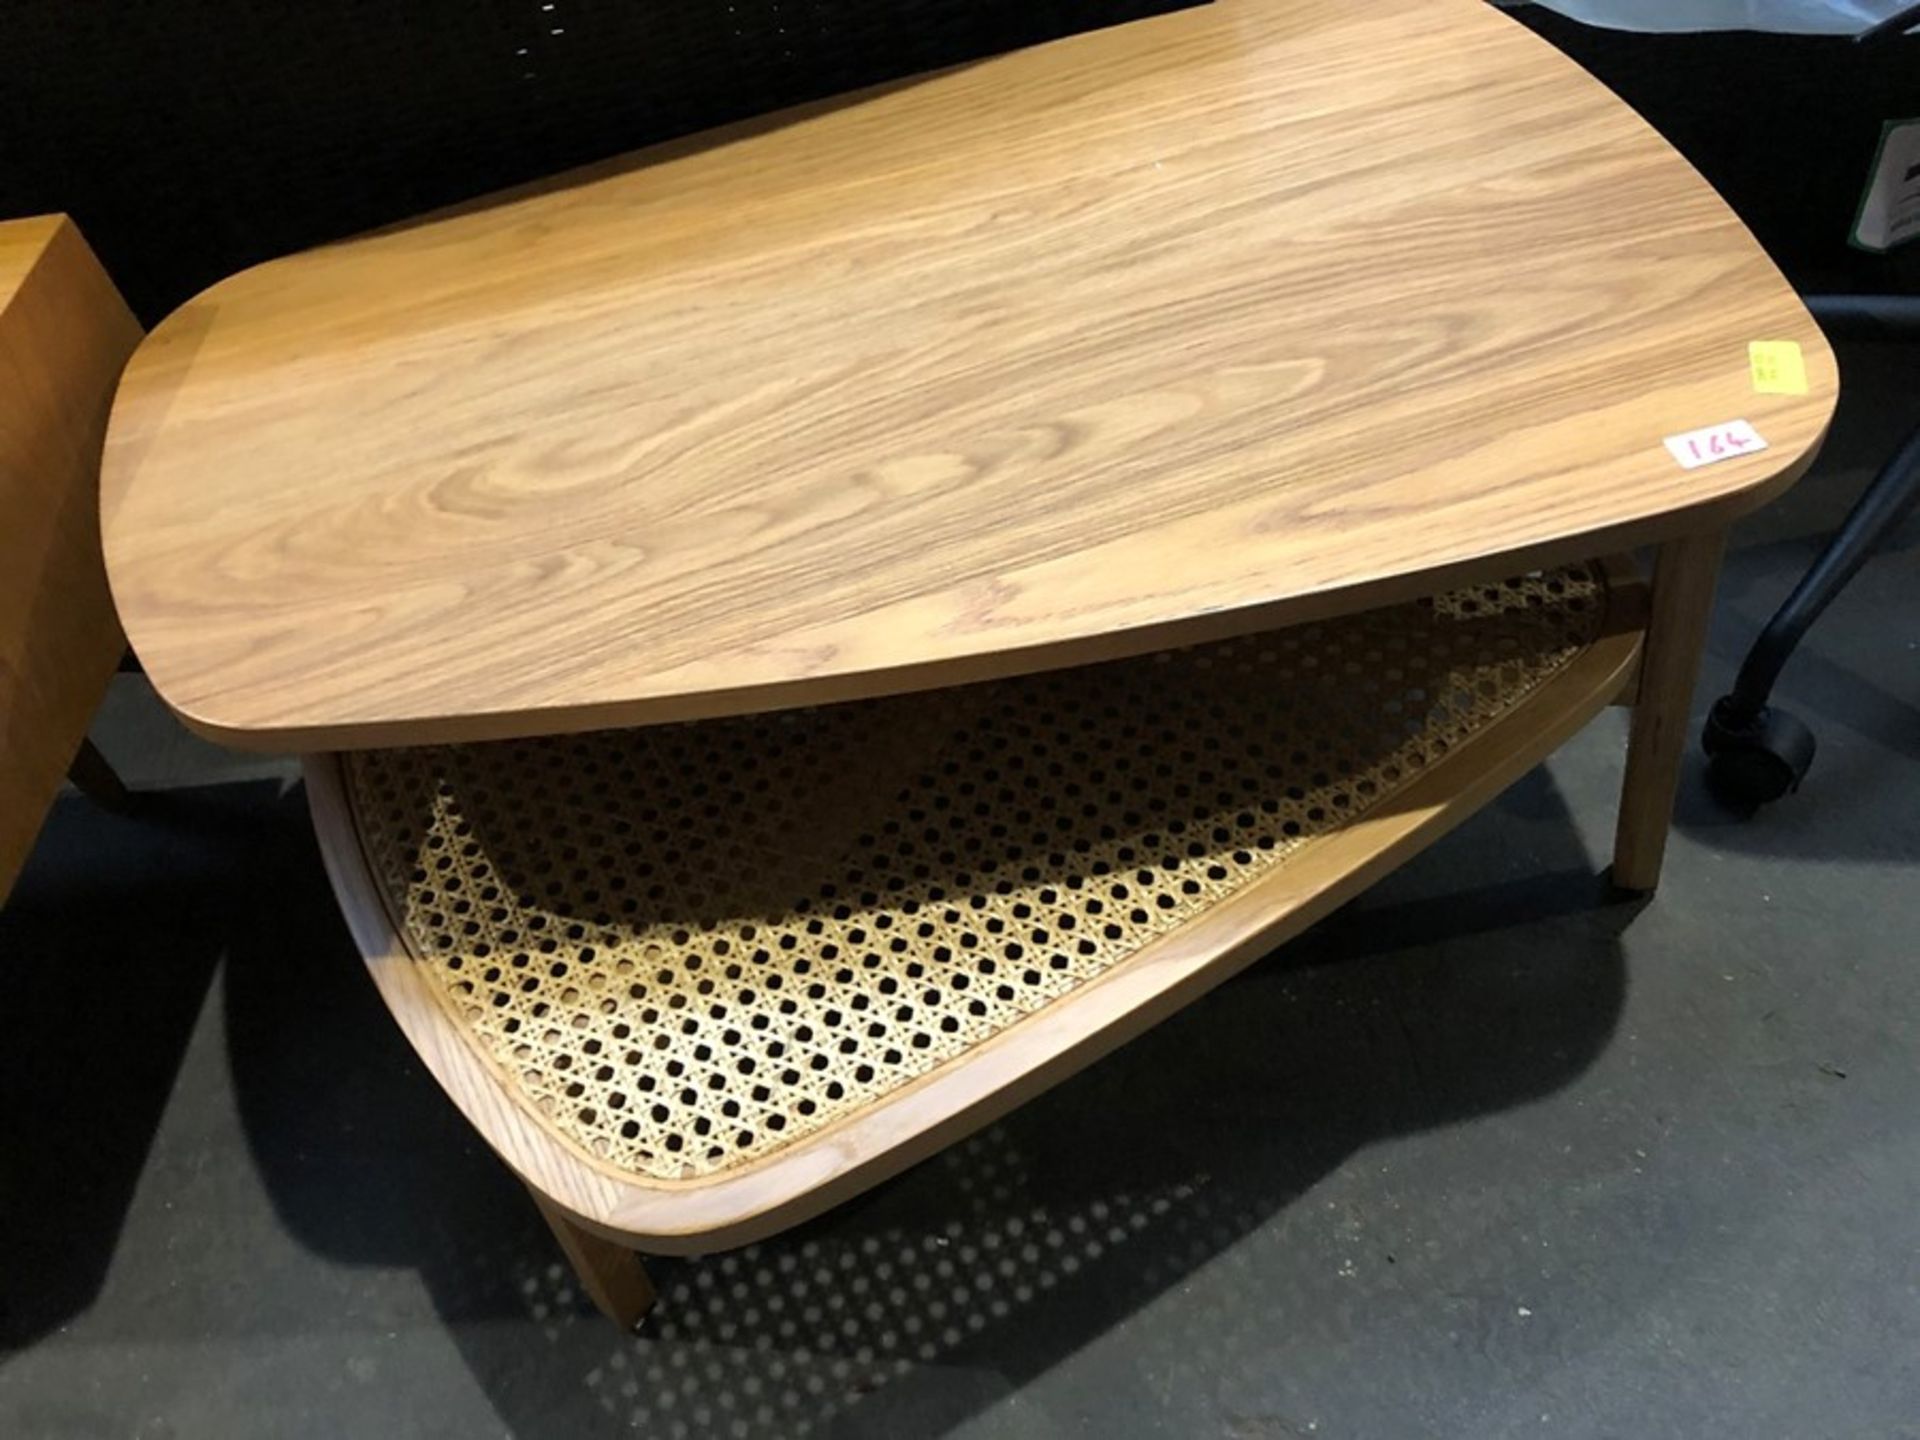 1 BESPOKE DESIGNER IRREGULAR COFFEE TABLE (PUBLIC VIEWING AVAILABLE)